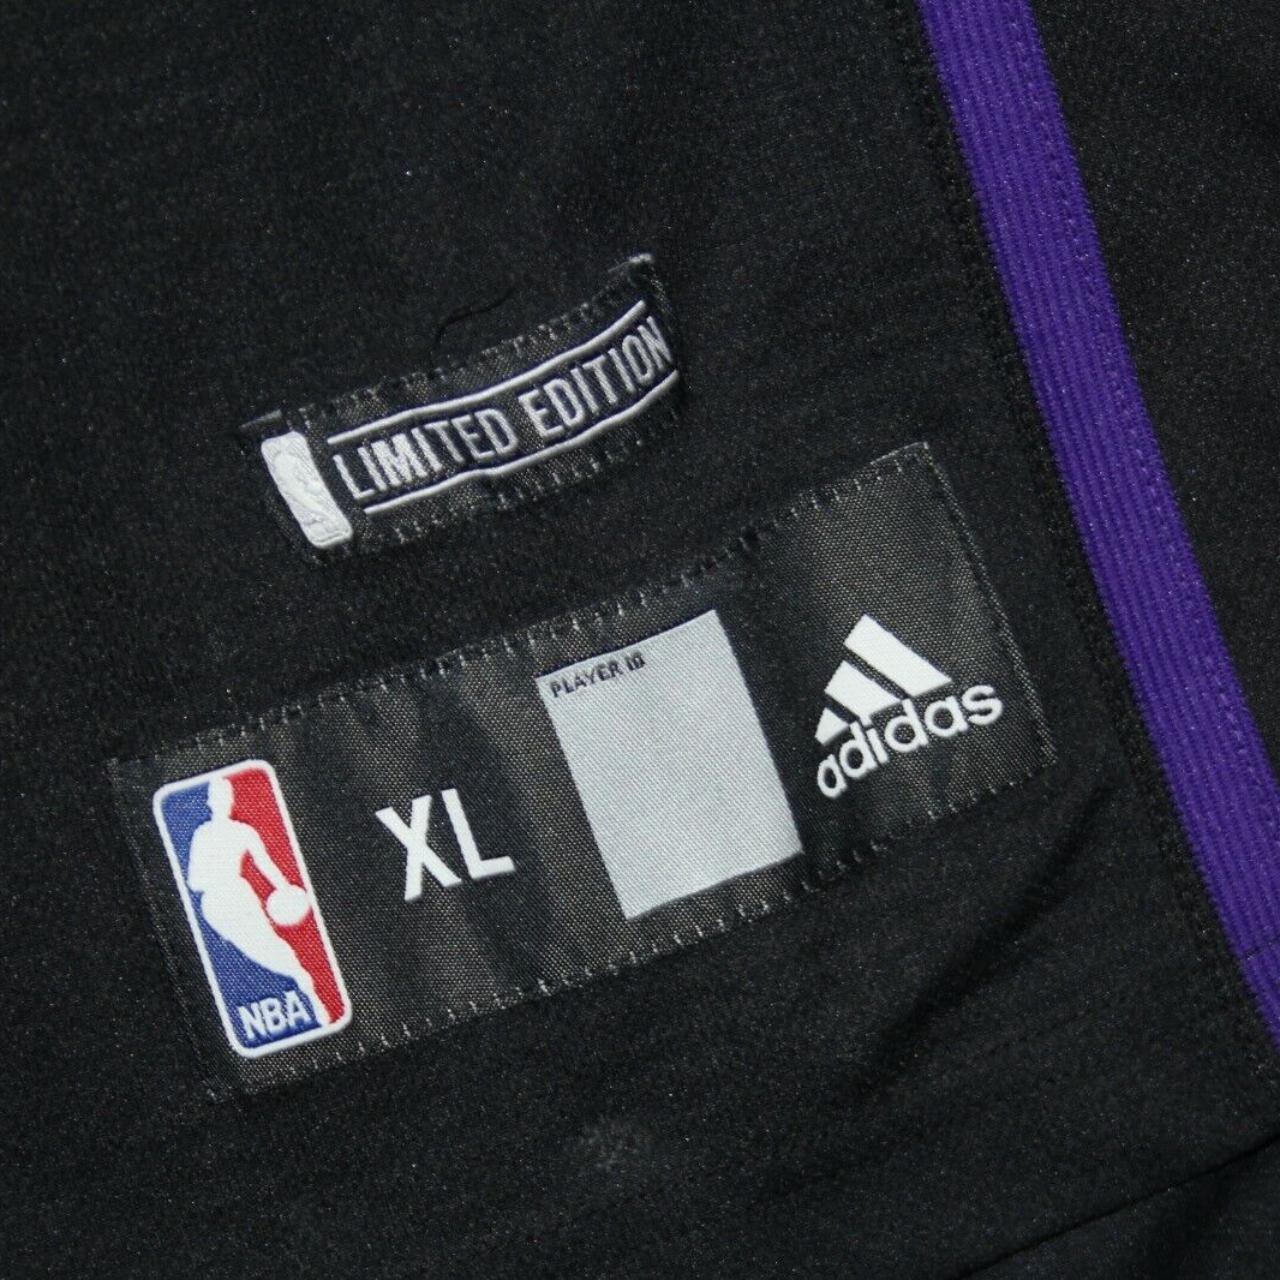 Los Angeles Lakers Kobe Bryant 24 Adidas Jersey Limited Edition